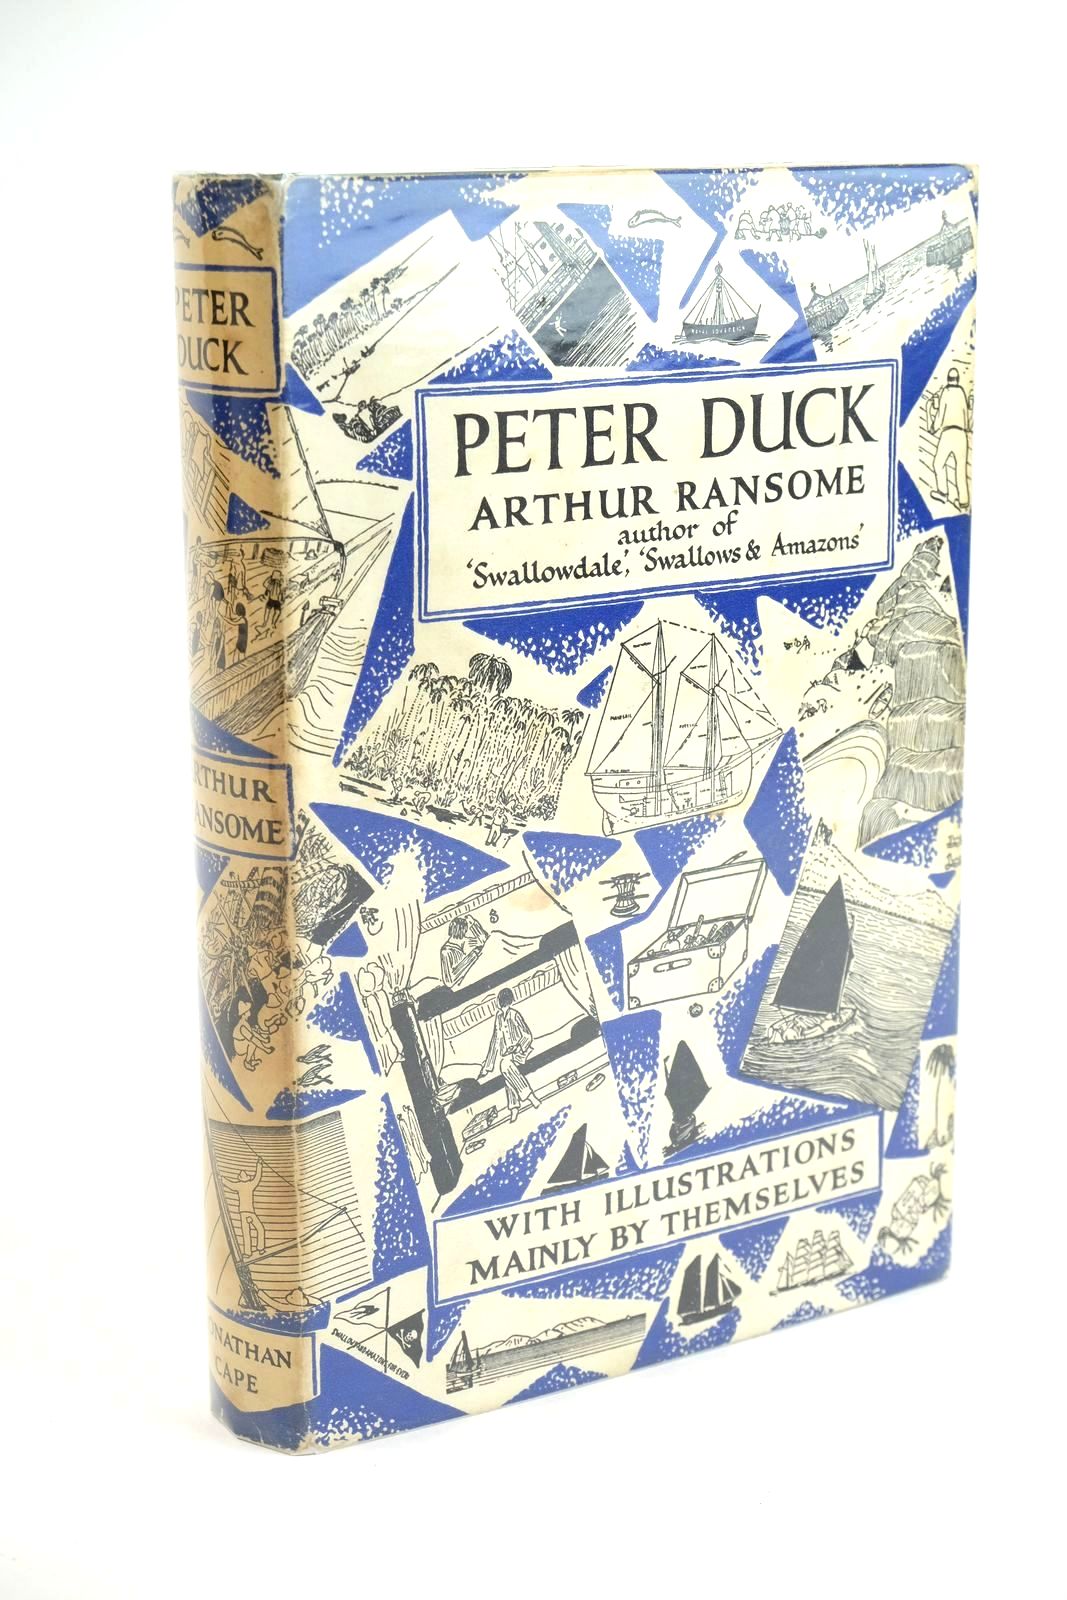 Photo of PETER DUCK written by Ransome, Arthur illustrated by Ransome, Arthur published by Jonathan Cape (STOCK CODE: 1323551)  for sale by Stella & Rose's Books